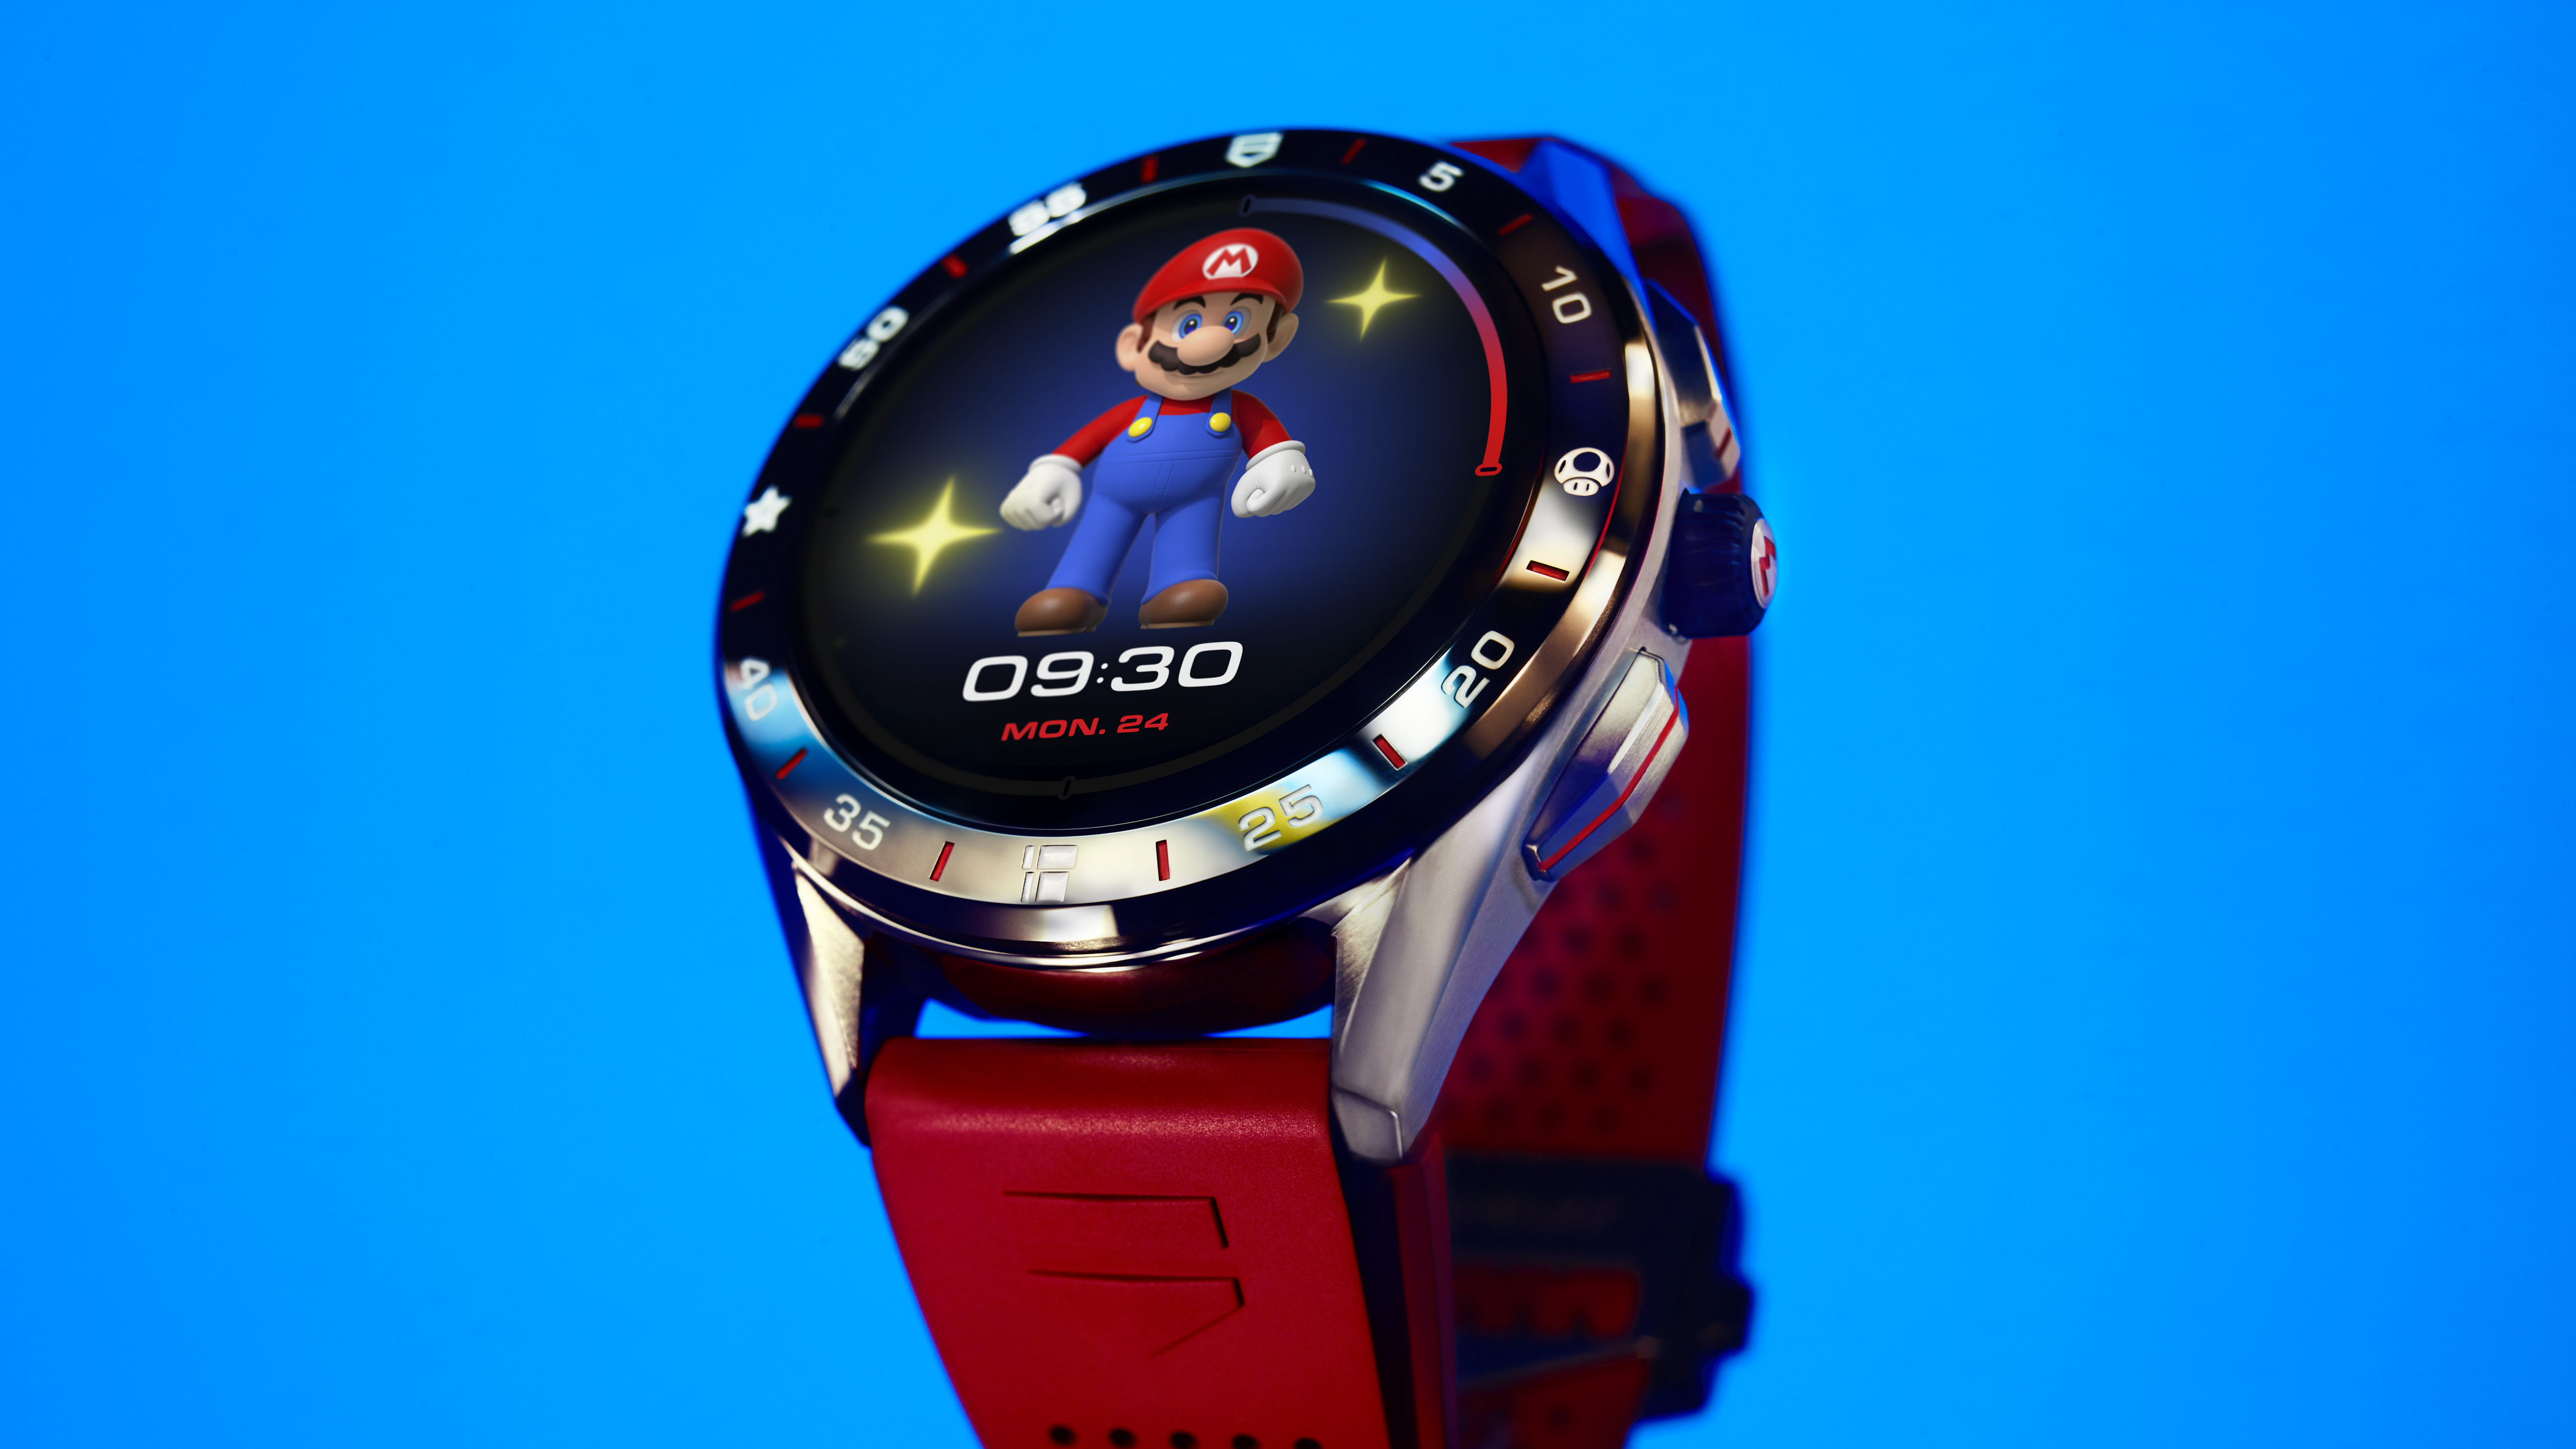 High Quality PNG SBG8A13.EB0238 STILLLIFE 9 16 9 Nintendo Deal Brings Mario To Exclusive Tag Heuer Watch